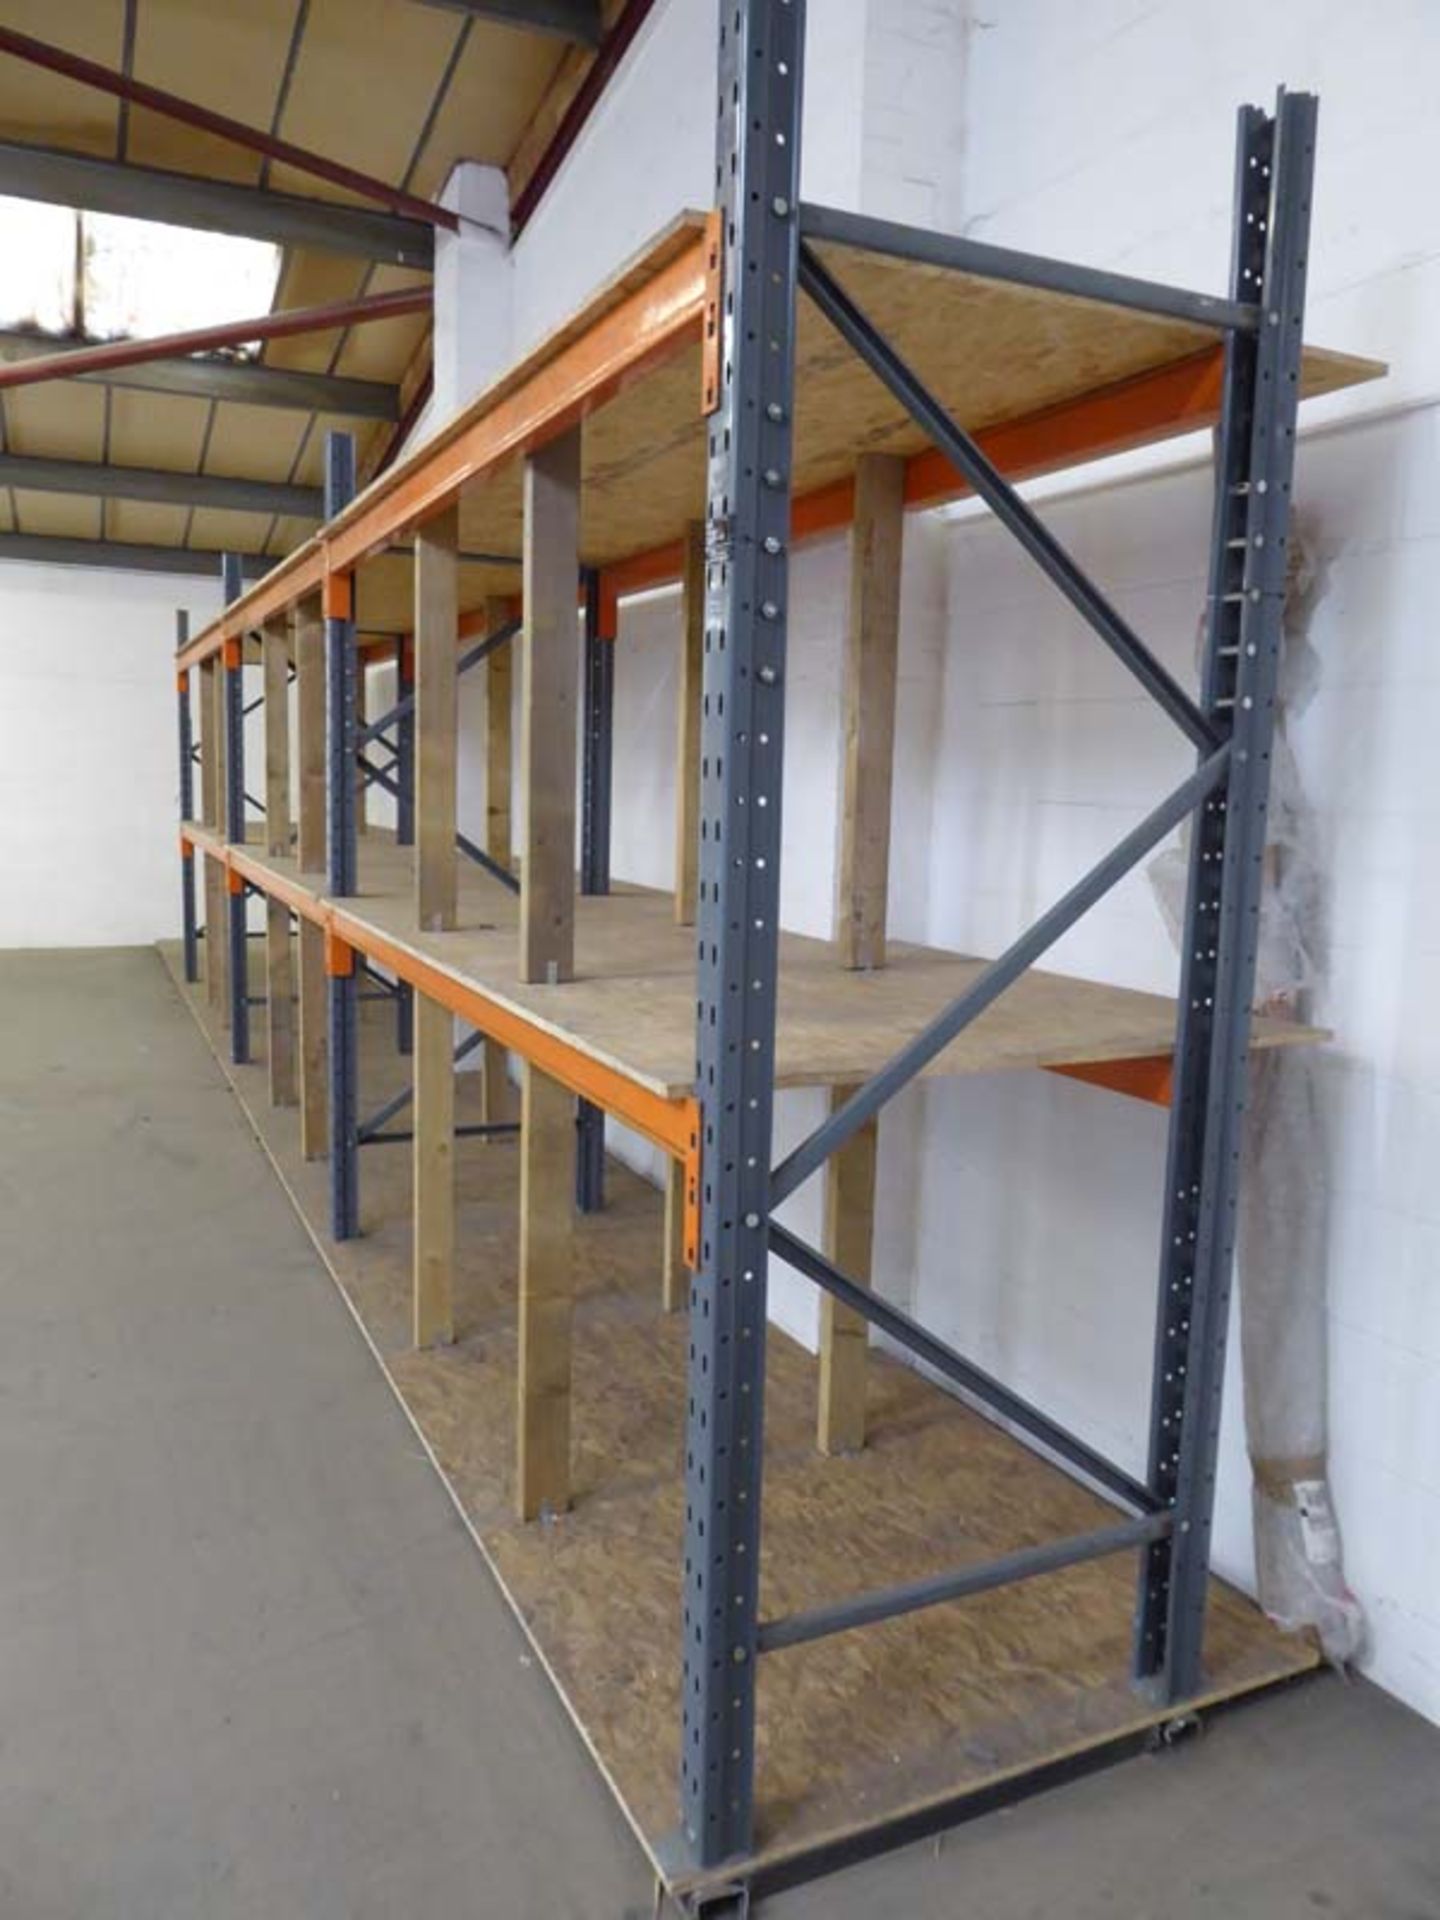 4 bays of mainly Dexion Speedloc grey and orange pallet racking together with various additional - Image 2 of 4